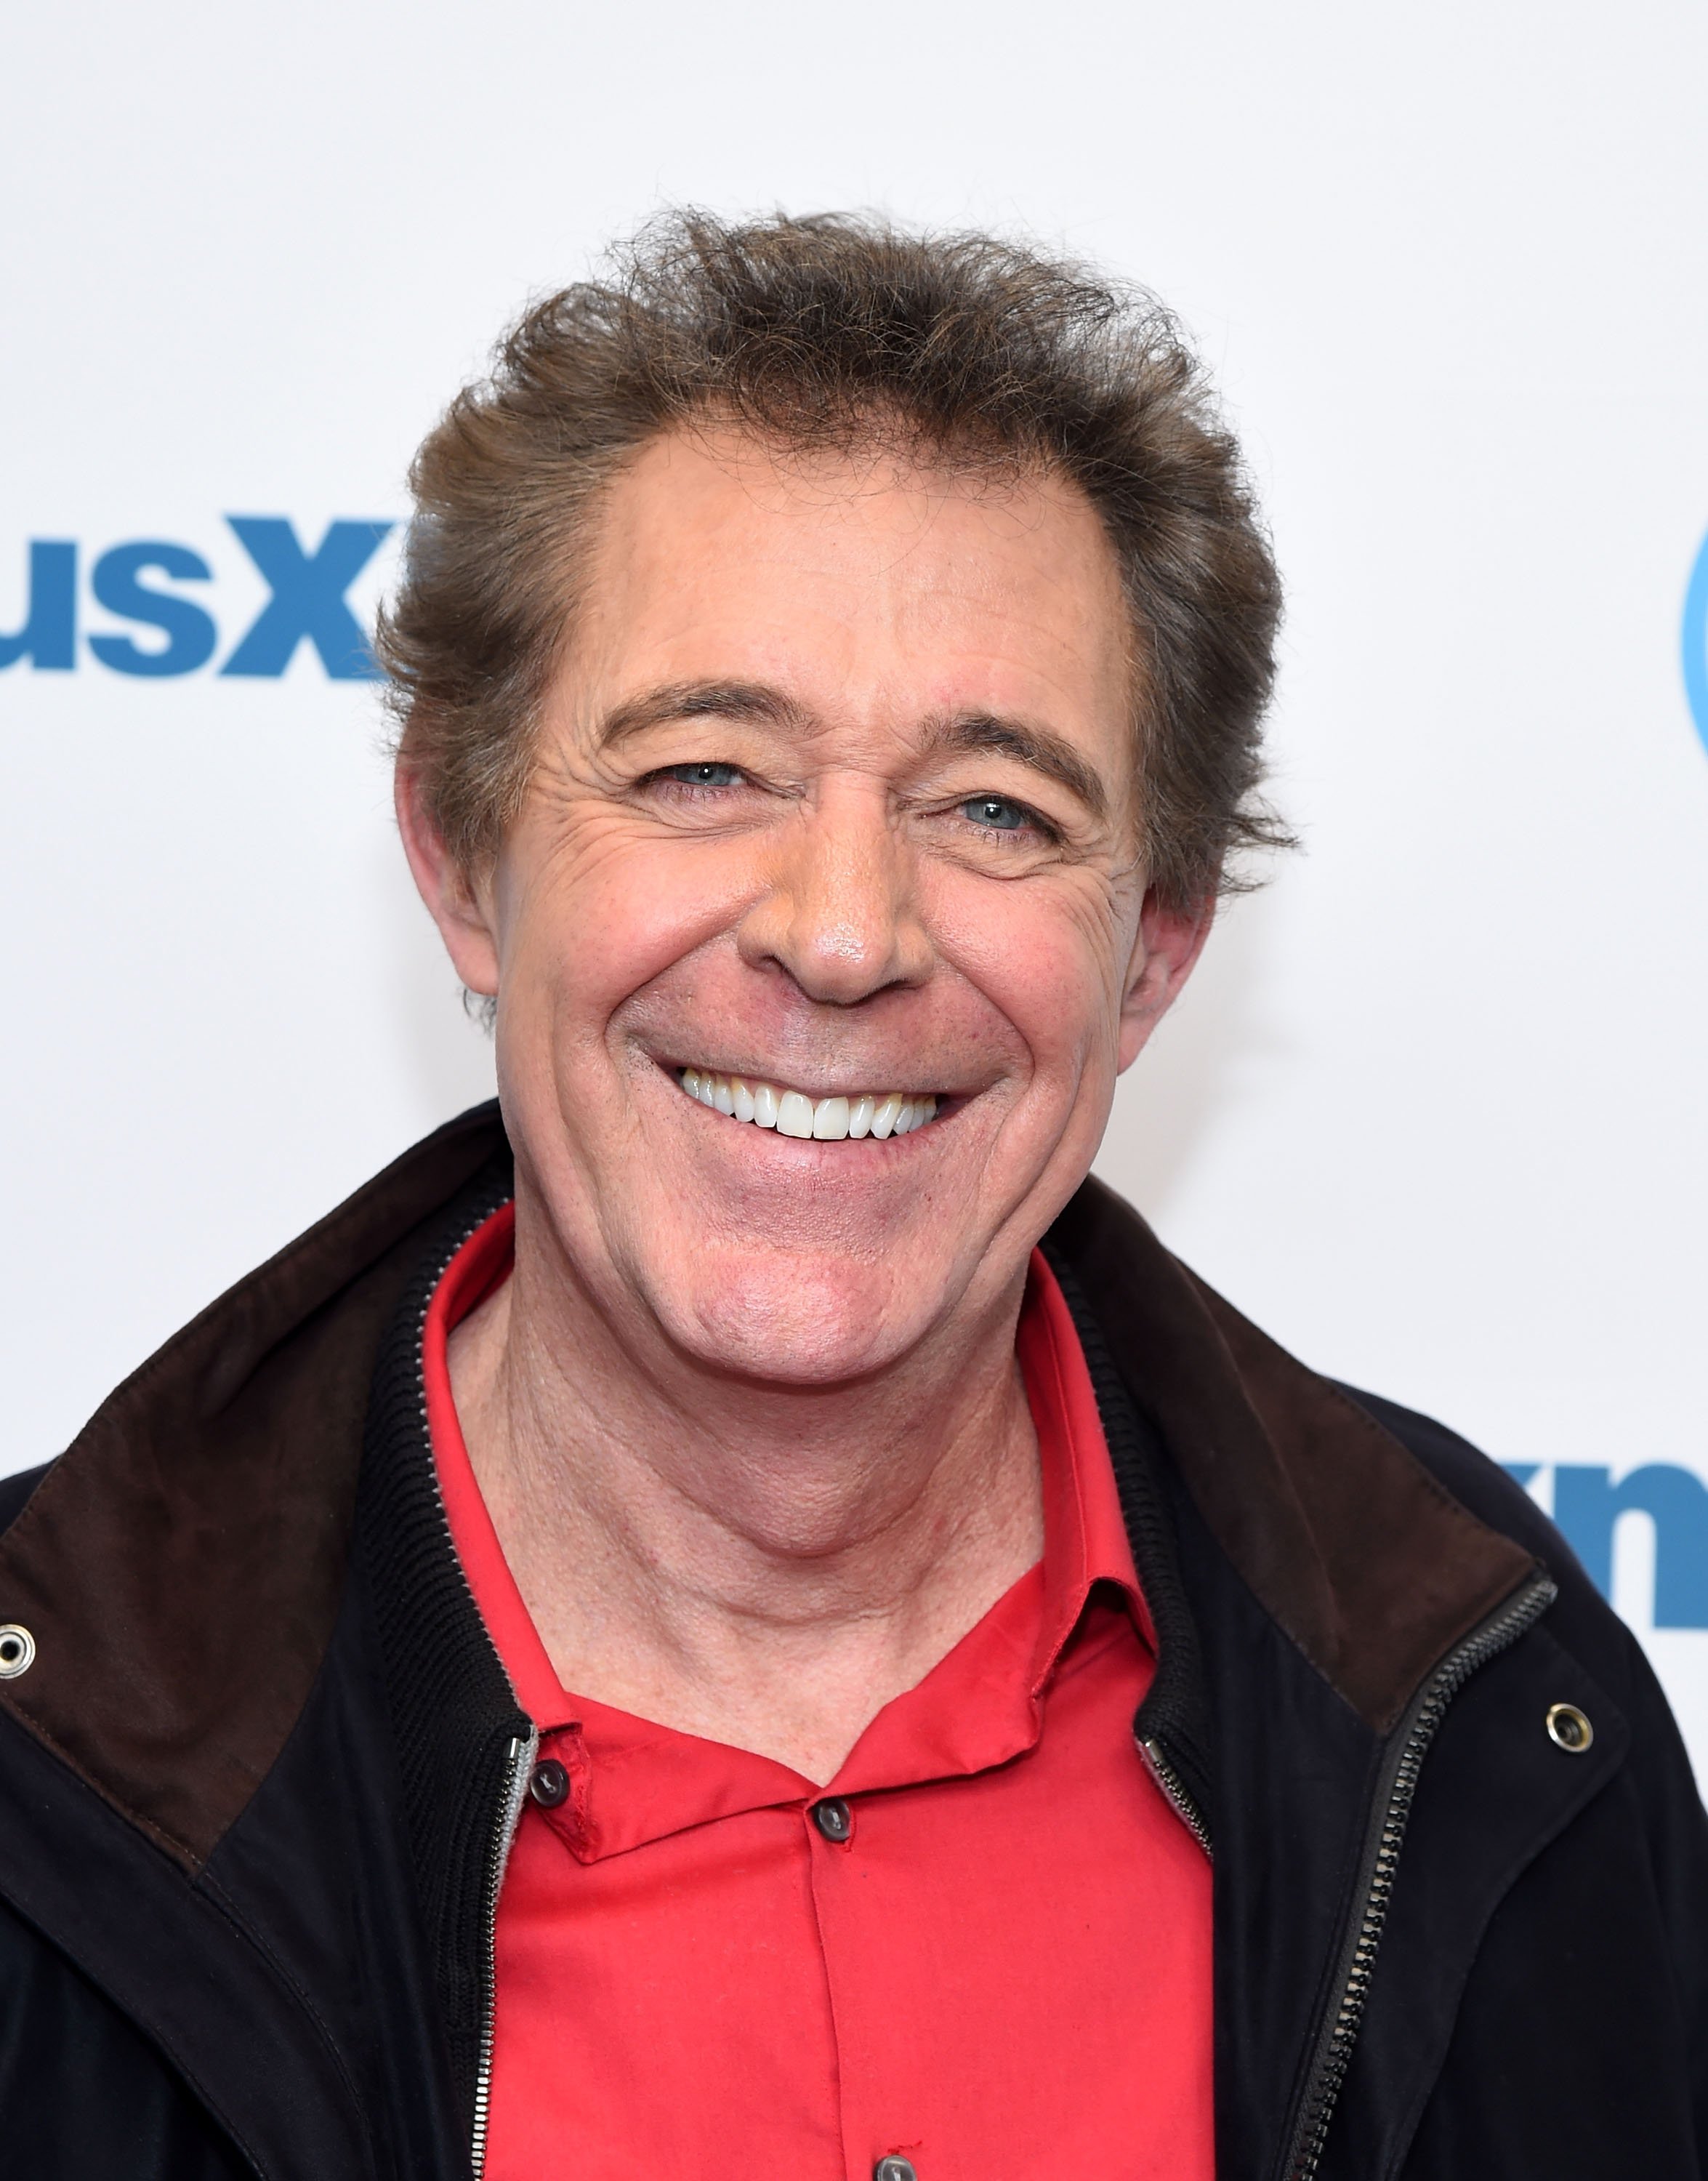 Actor Barry Williams on February 5, 2015 in New York City. | Source: Getty Images